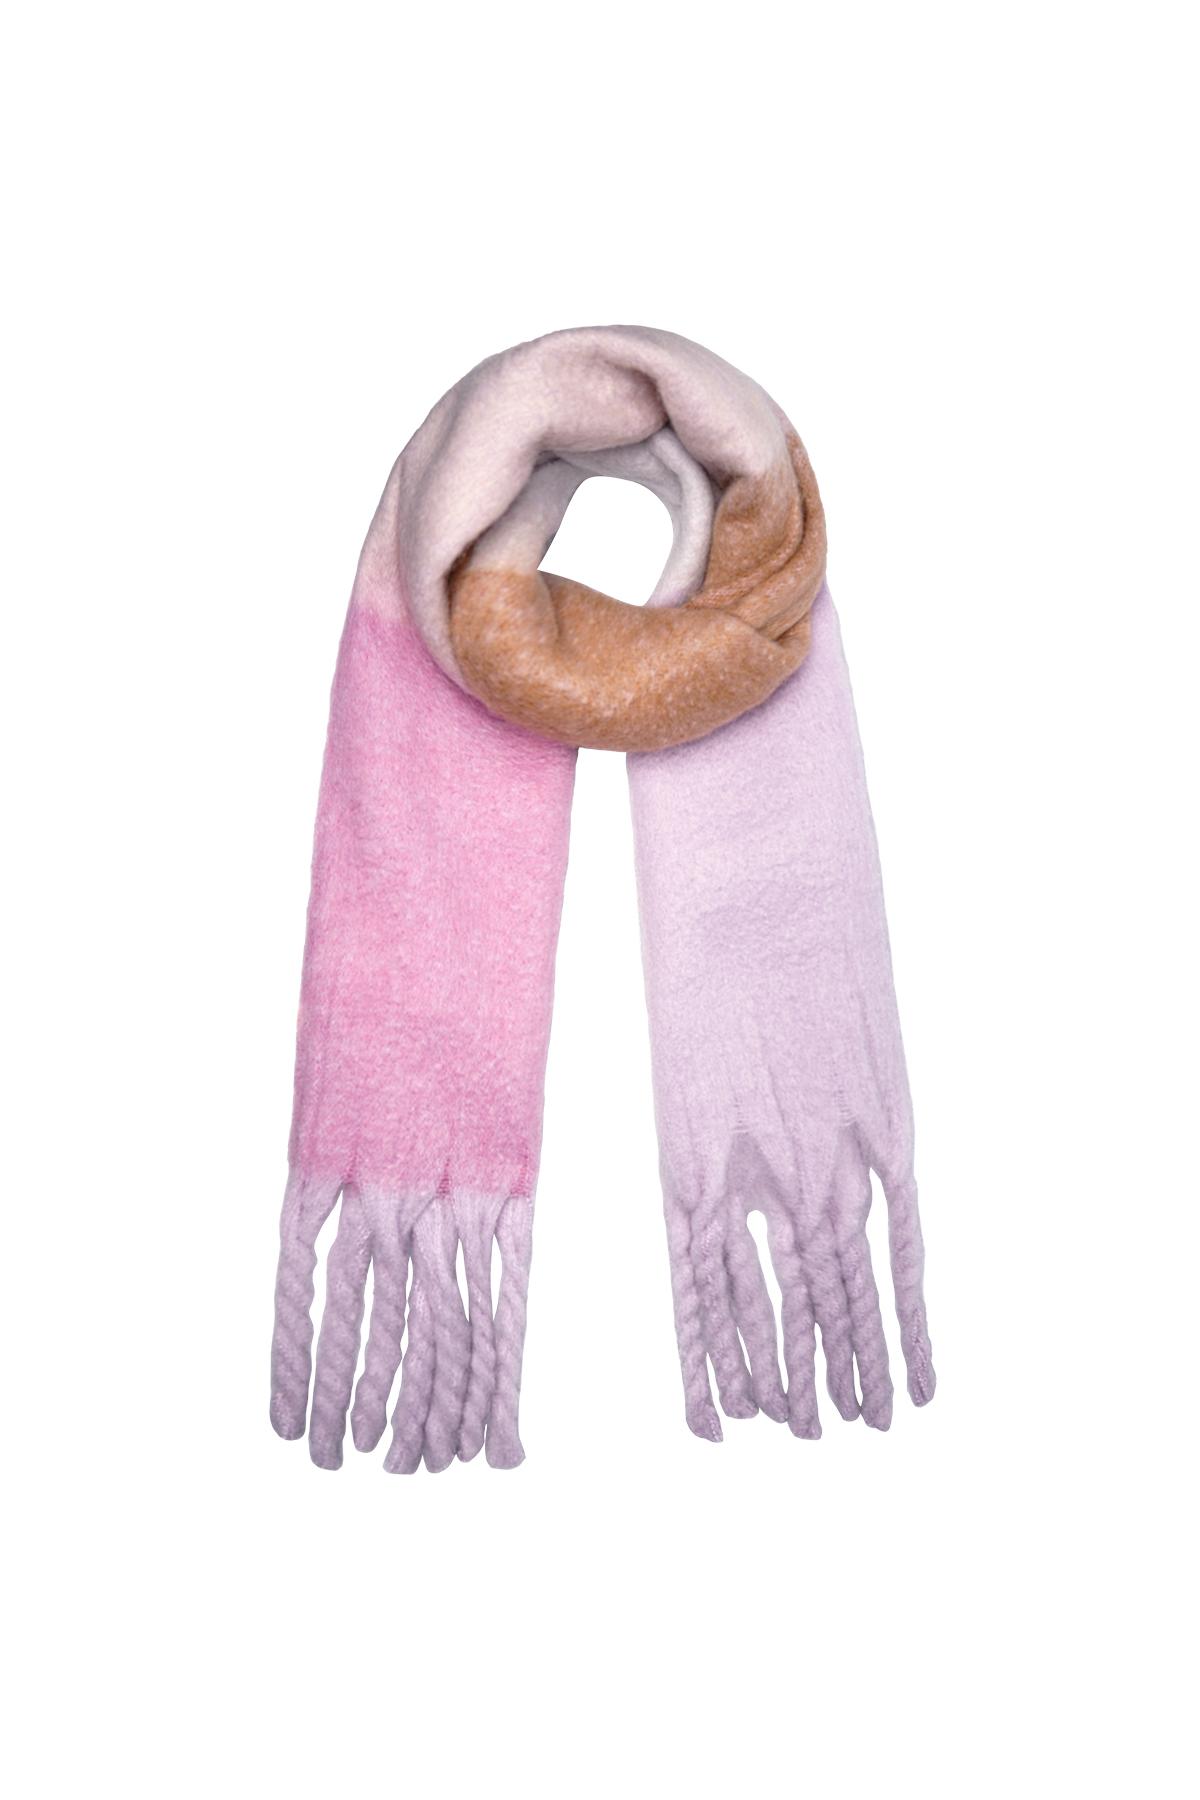 Echarpe couleurs claires Lilas Polyester